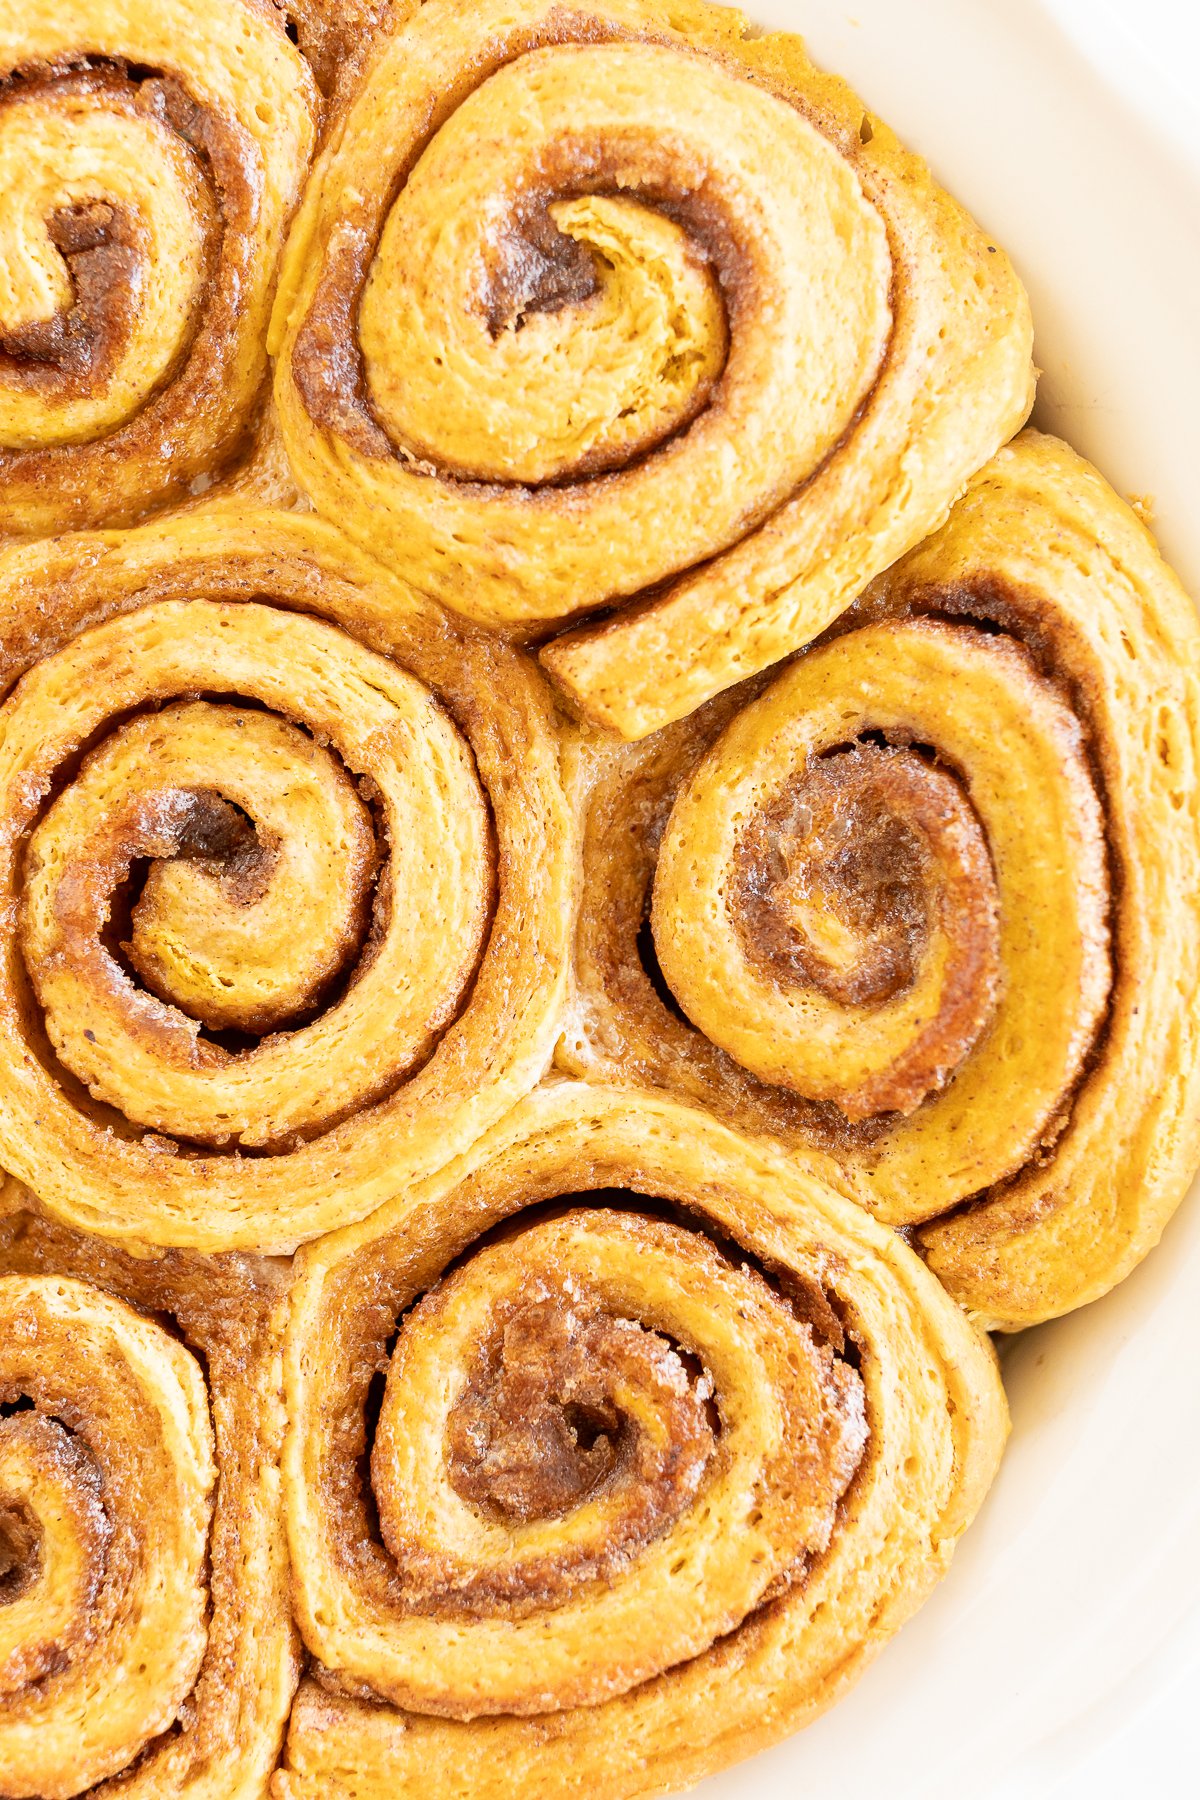 Pumpkin cinnamon rolls in a white dish are a delightful treat that combines the warm flavors of pumpkin and the aromatic spice of cinnamon.